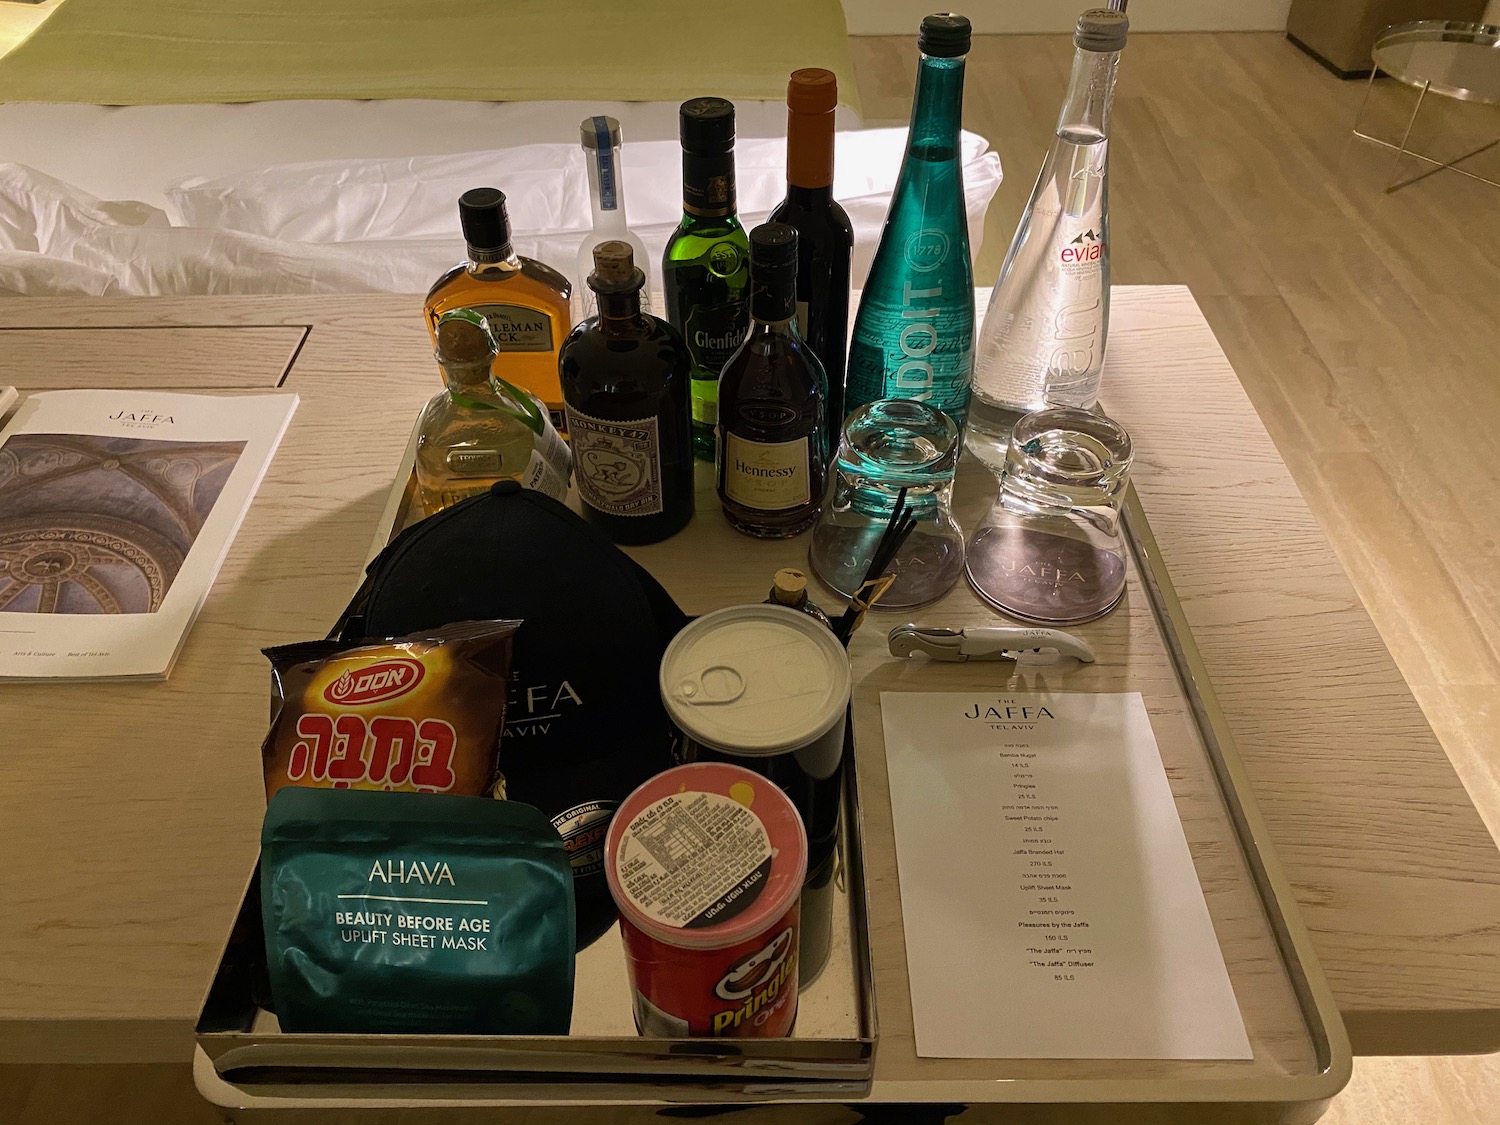 a tray with bottles and food on it